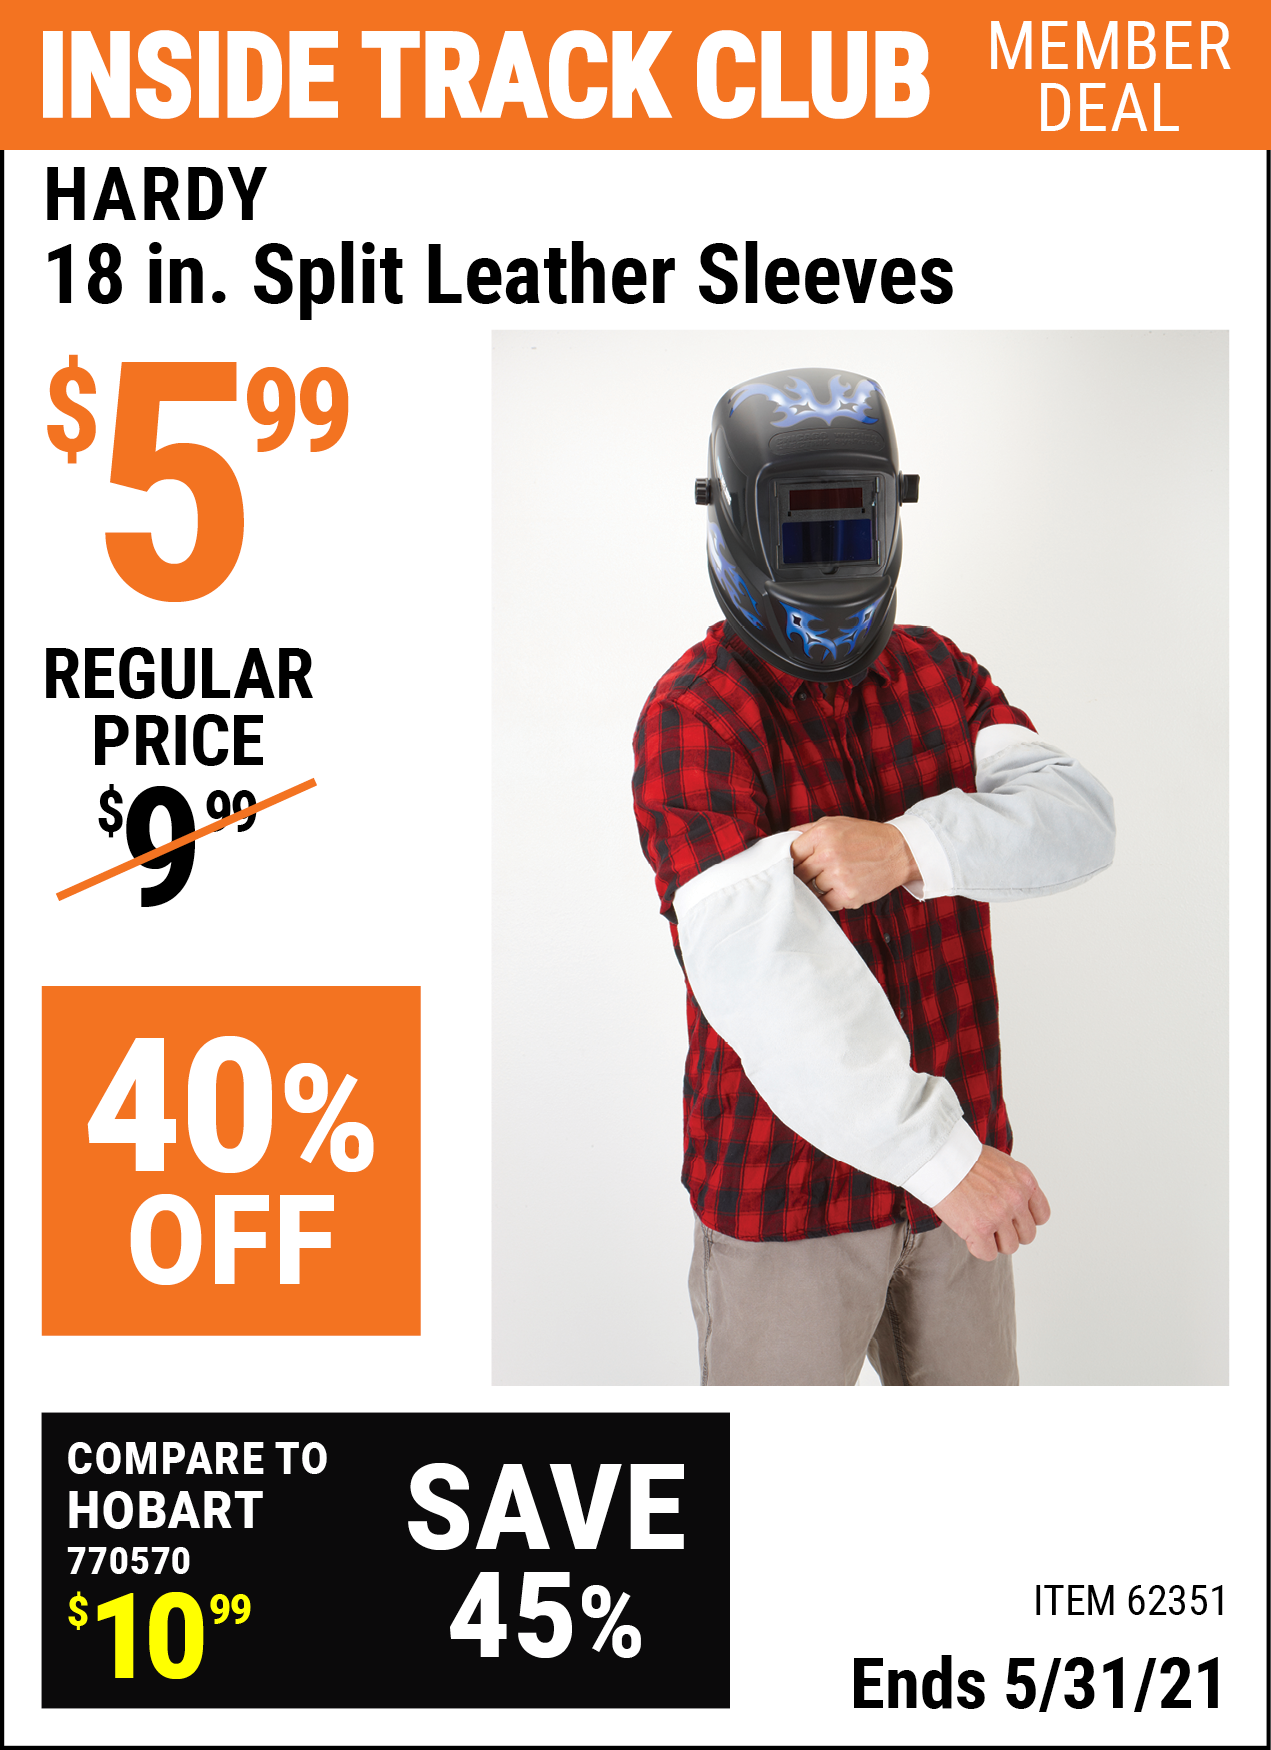 Inside Track Club members can buy the HARDY 18 in. Split Leather Sleeves (Item 62351) for $5.99, valid through 5/31/2021.